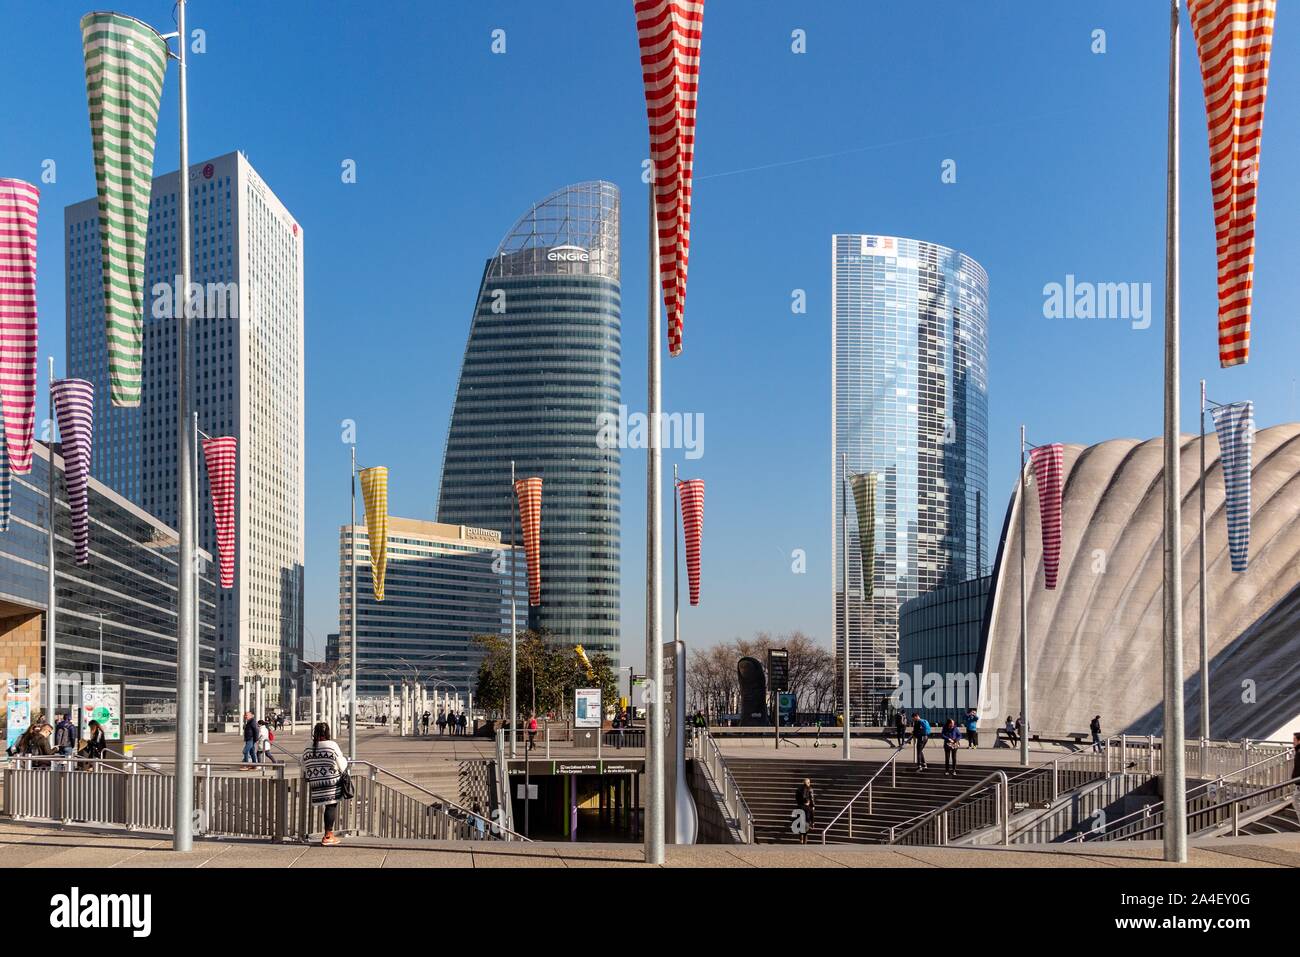 CNIT AND TOWERS OF THE ENGIE CORPORATION BUILDINGS BEHIND THE THE 'RONDE DES MANCHES À AIR', A WORK BY DANIEL BUREN, PARIS-LA DEFENSE, COURBEVOIE, FRANCE Stock Photo